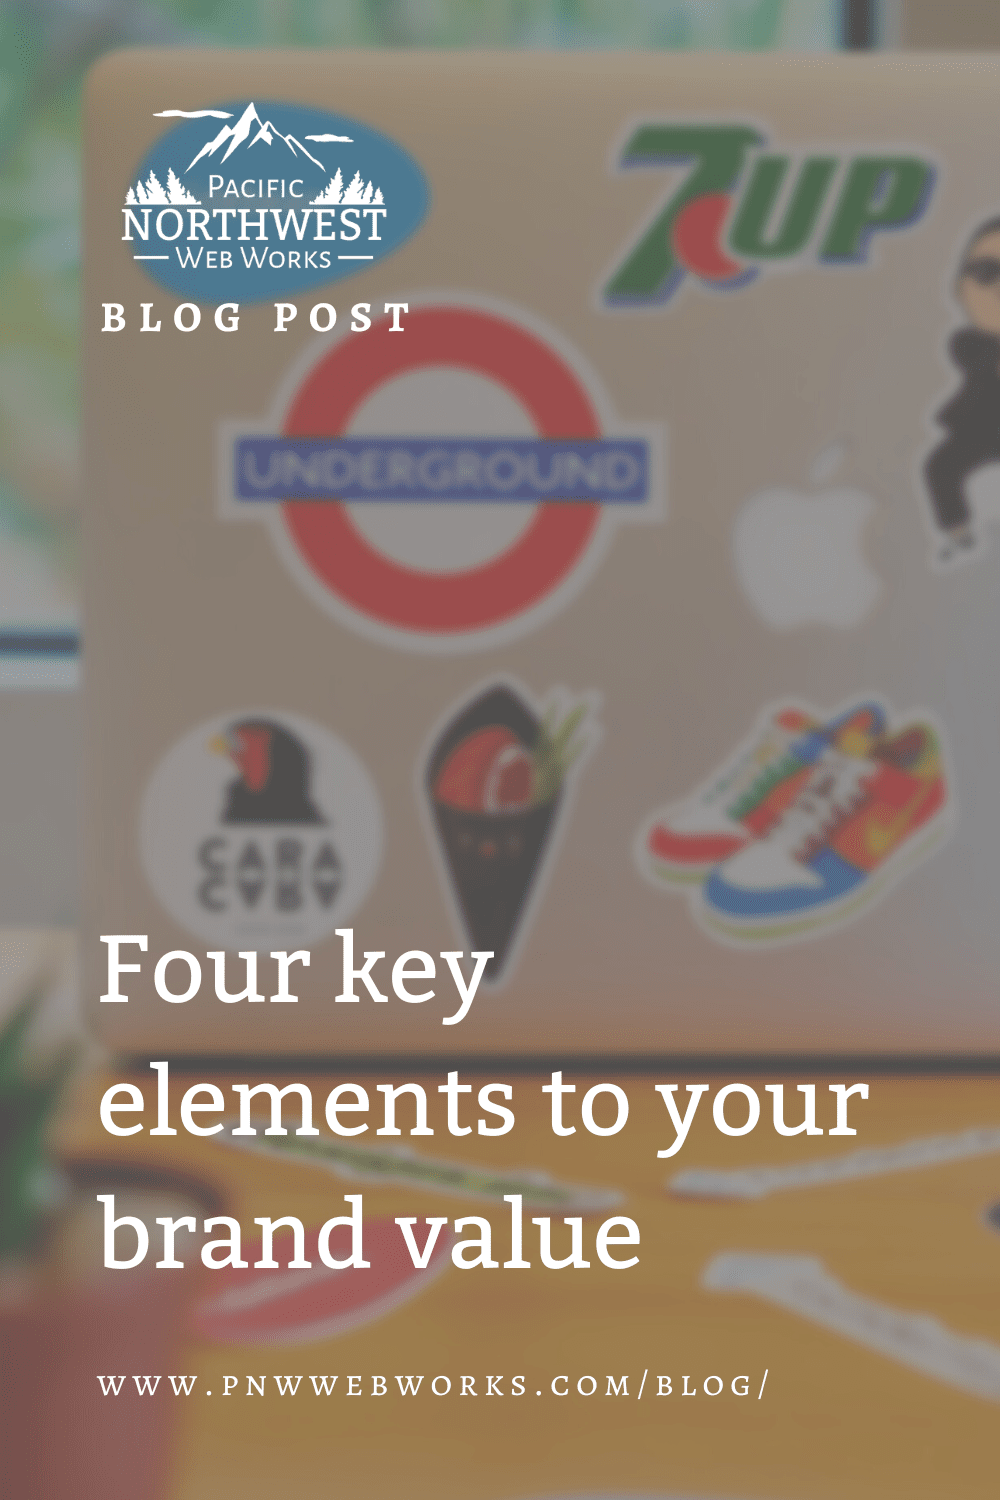 Four key elements to your brand value